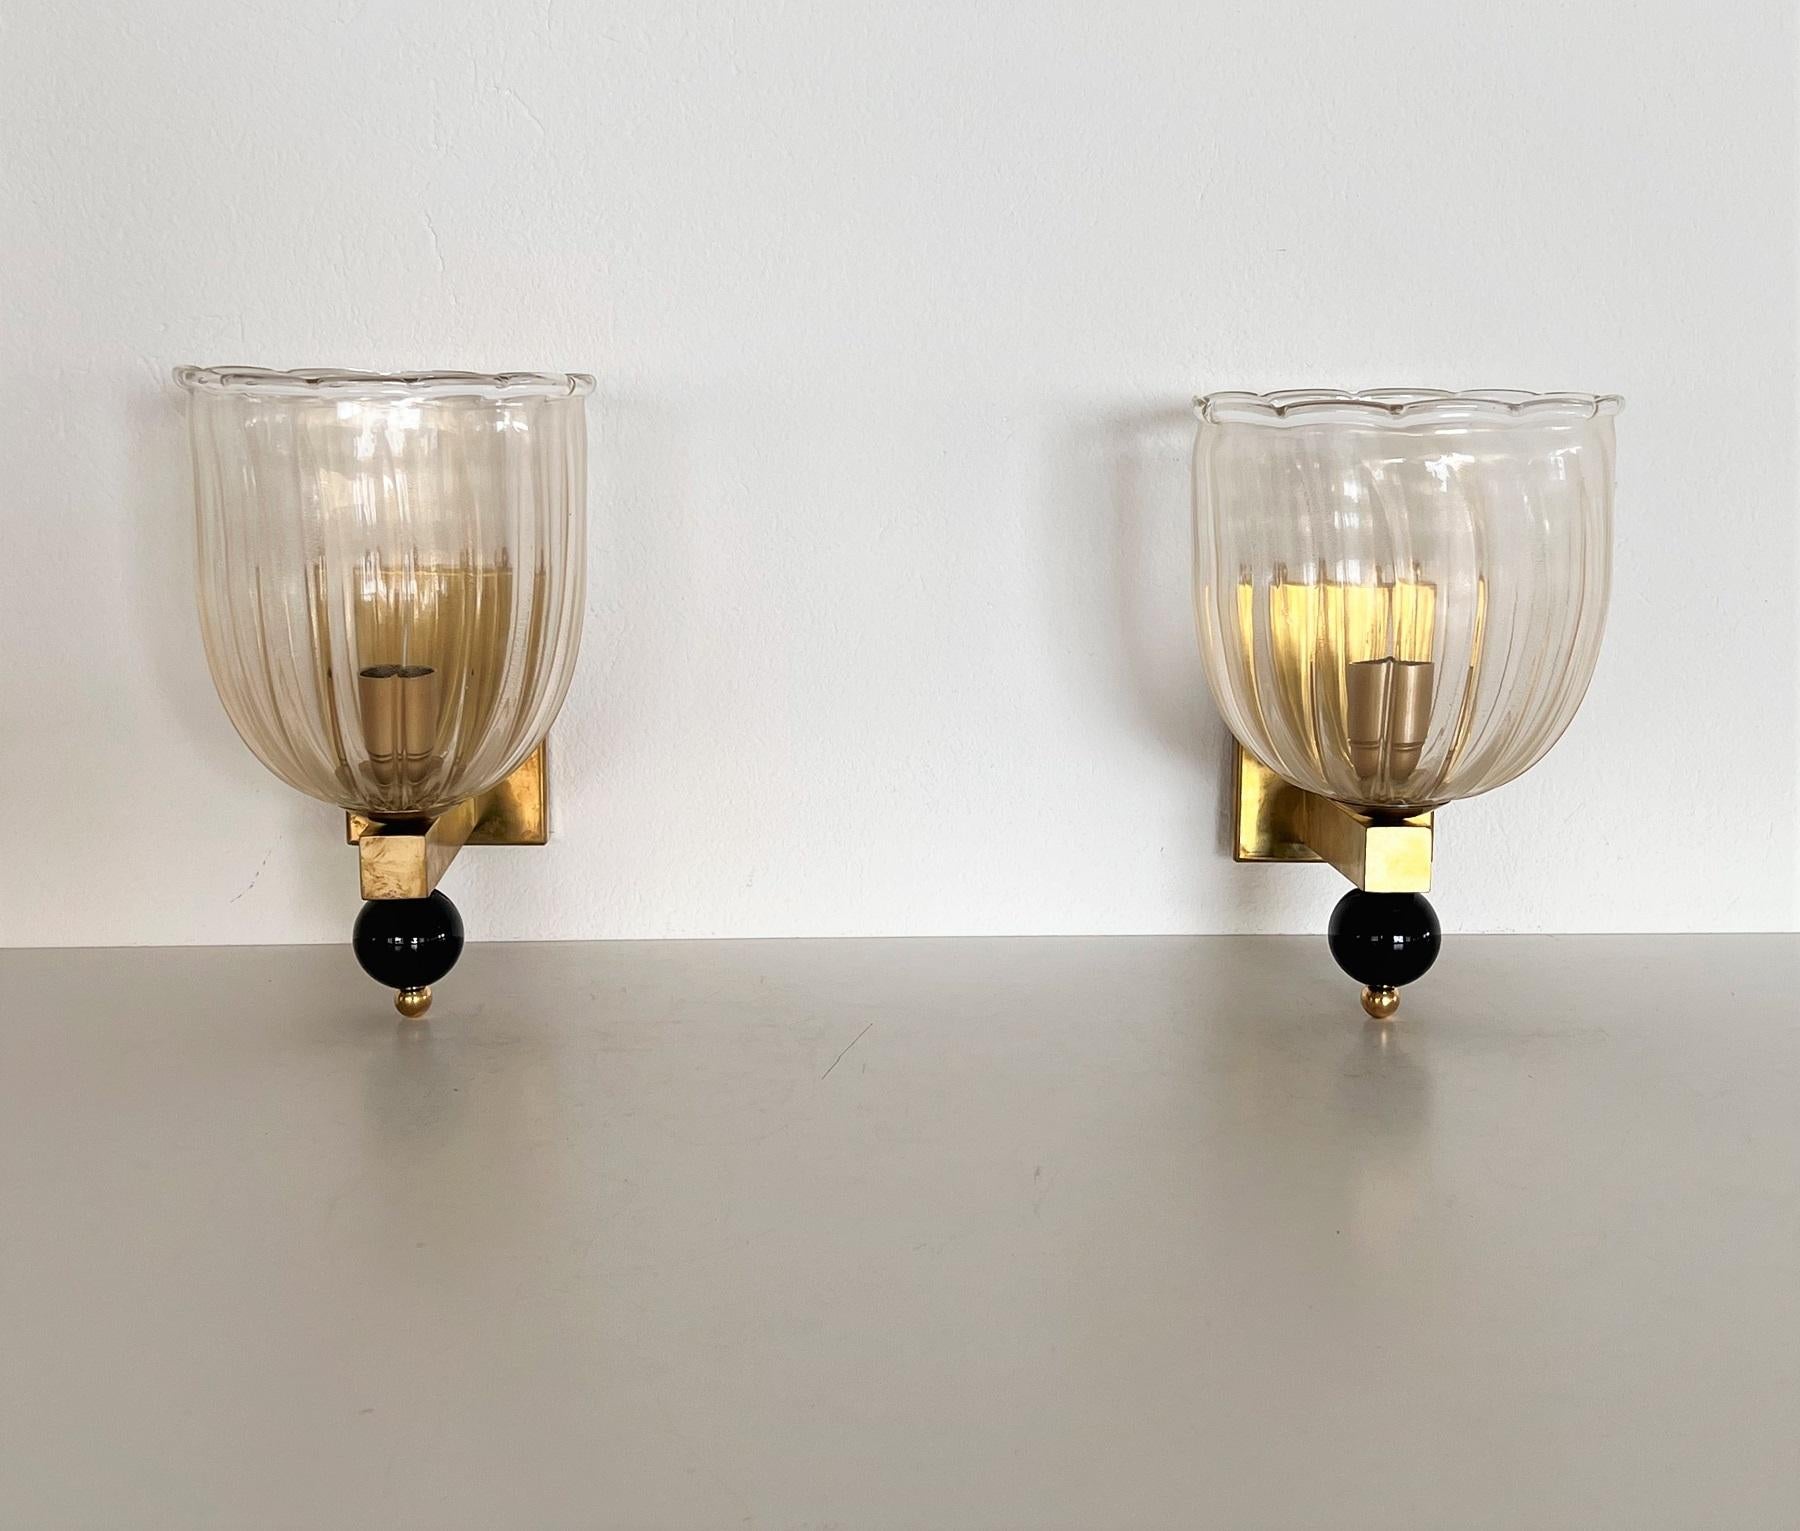 Beautiful set of two gorgeous brass wall lamps made of strong brass base and light transparent Murano glasses with golden shimmer/glitter inside the glass. 
At the bottom of the wall lamps are large glass balls, also handmade from black Murano